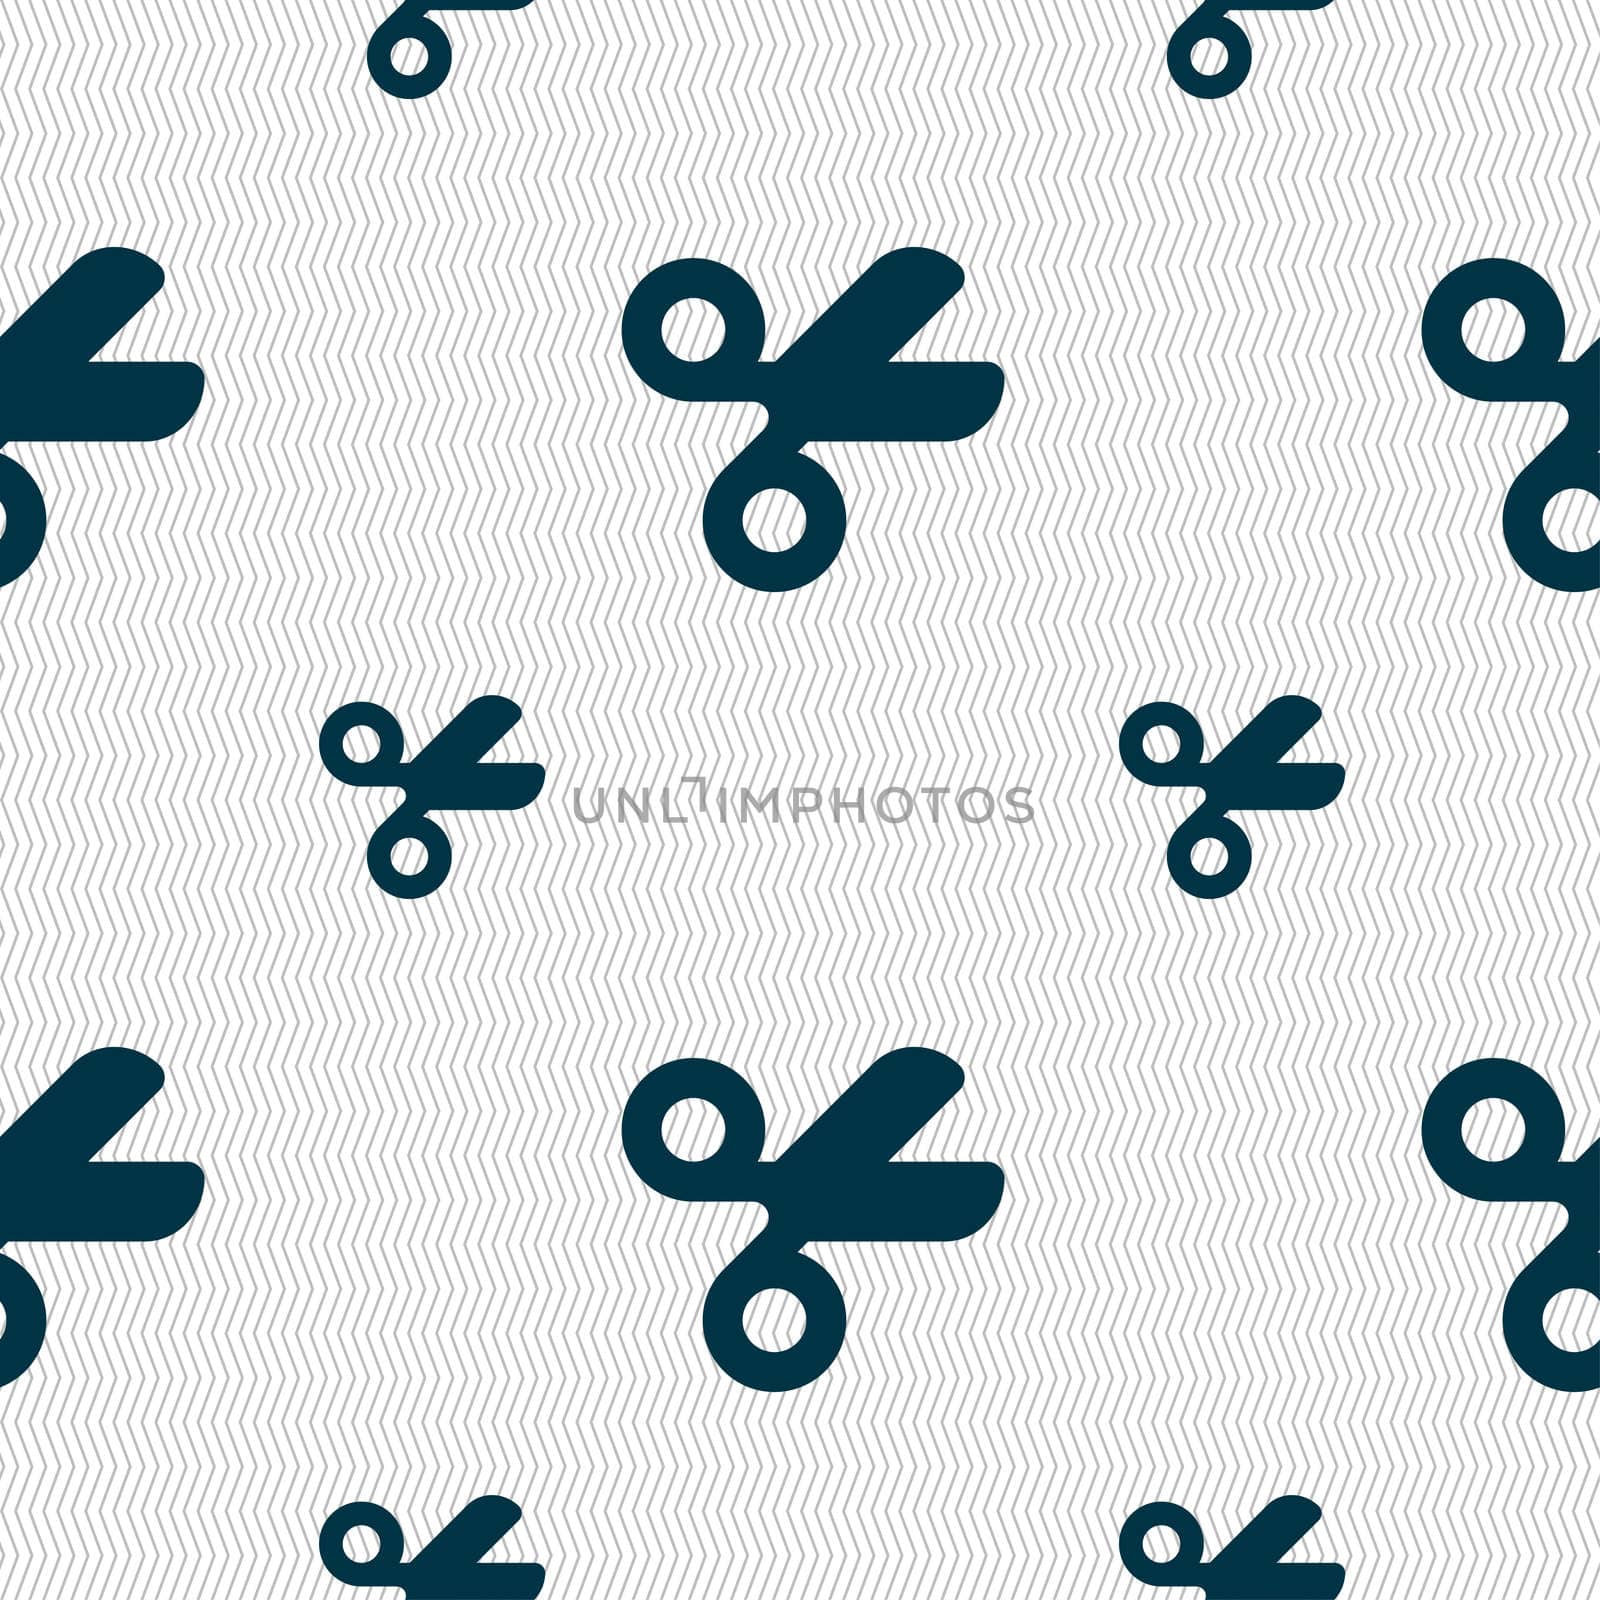 Scissors hairdresser, Tailor icon sign. Seamless pattern with geometric texture. illustration